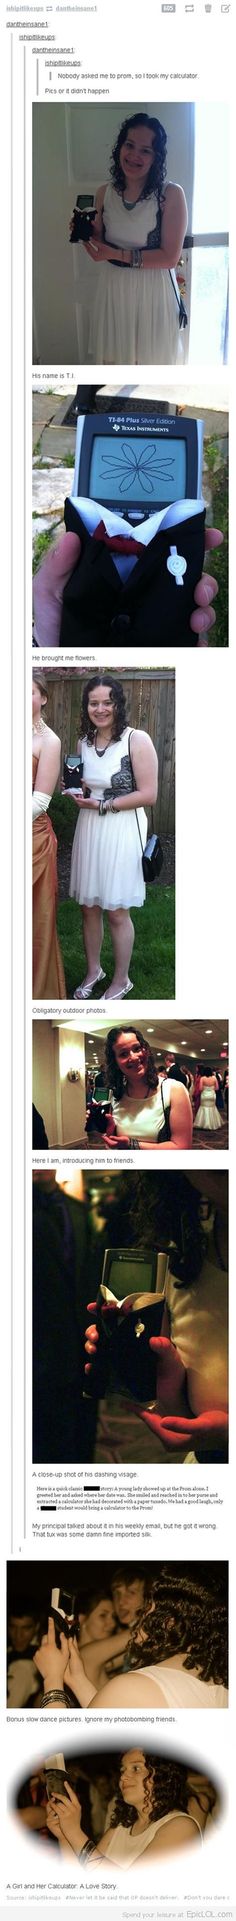 an image of a woman in a white dress and some other images are being viewed